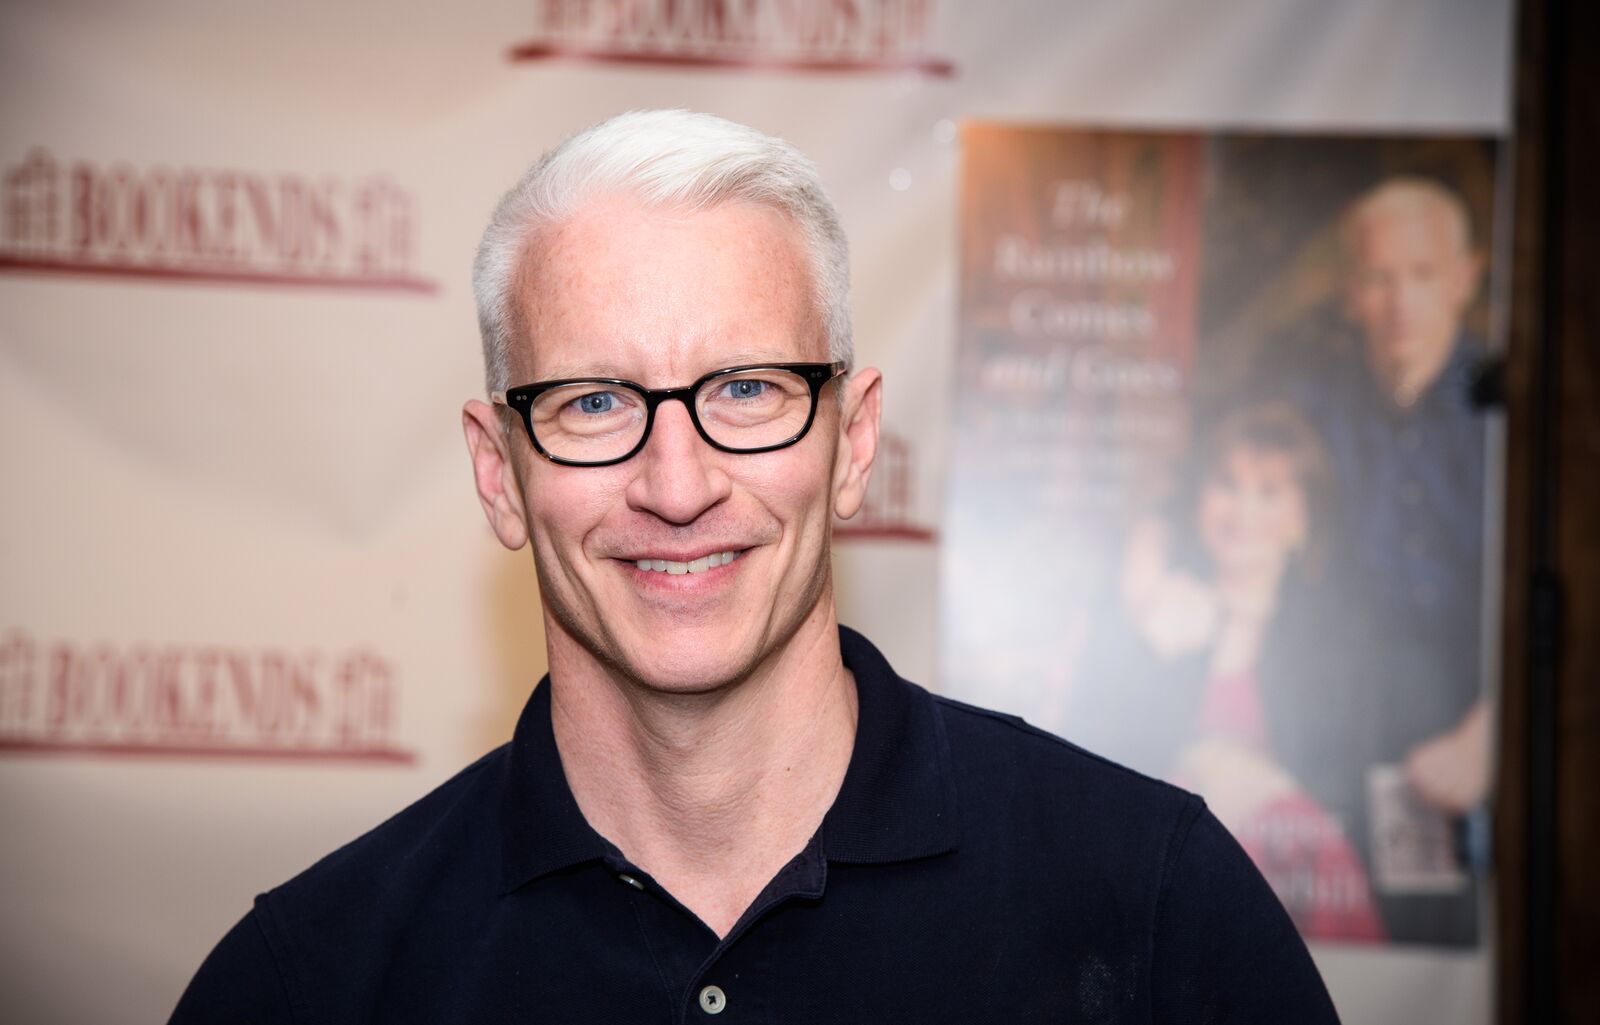 Anderson Cooper at the Bookends Bookstore on April 24, 2016 | Photo: Getty Images